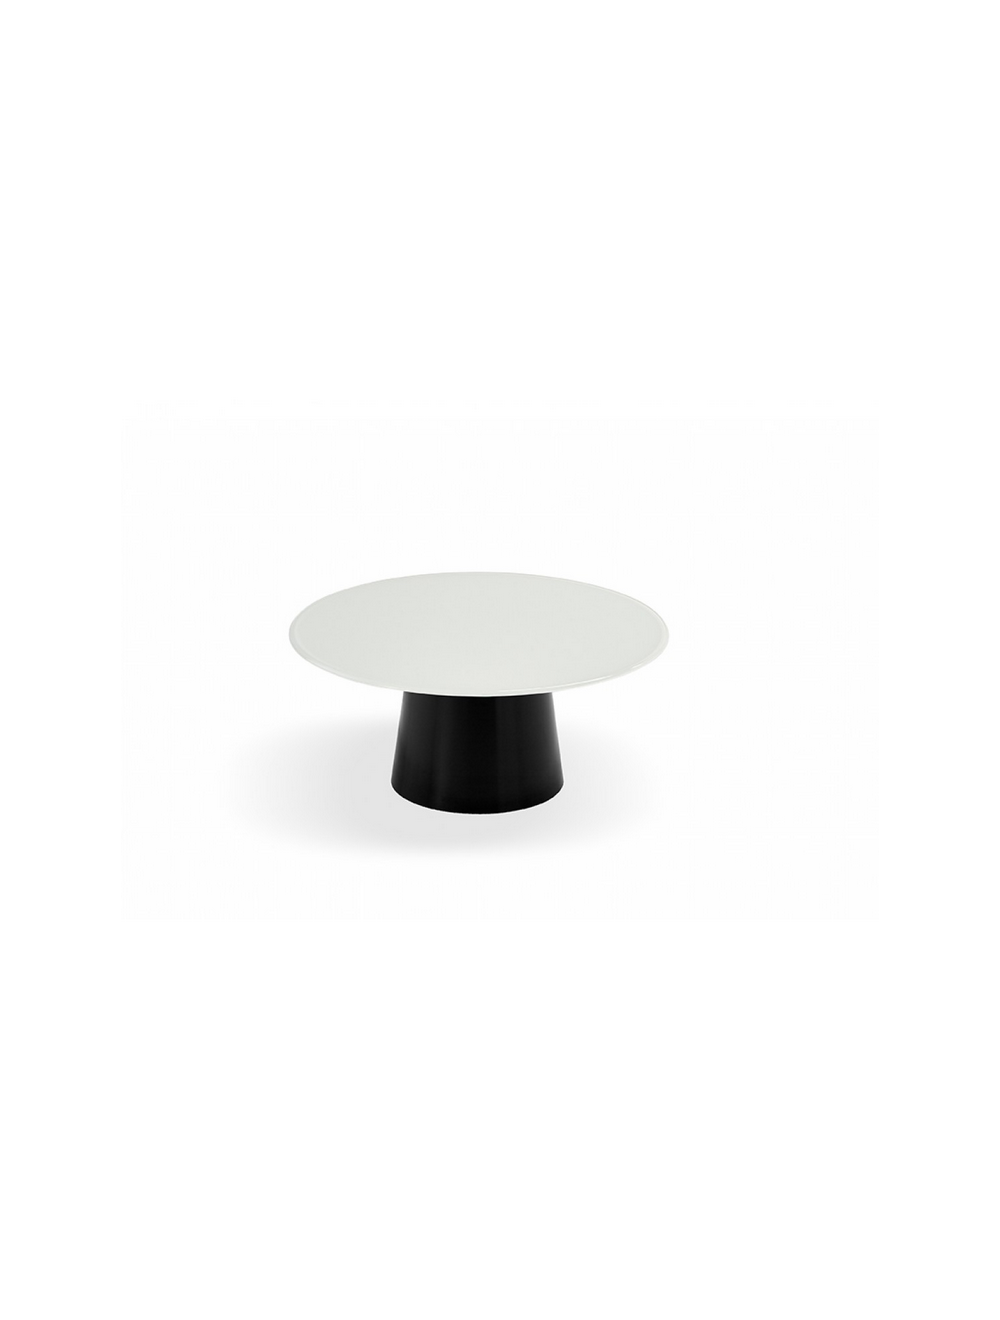 Table Totem Round by Sovet, Vente online